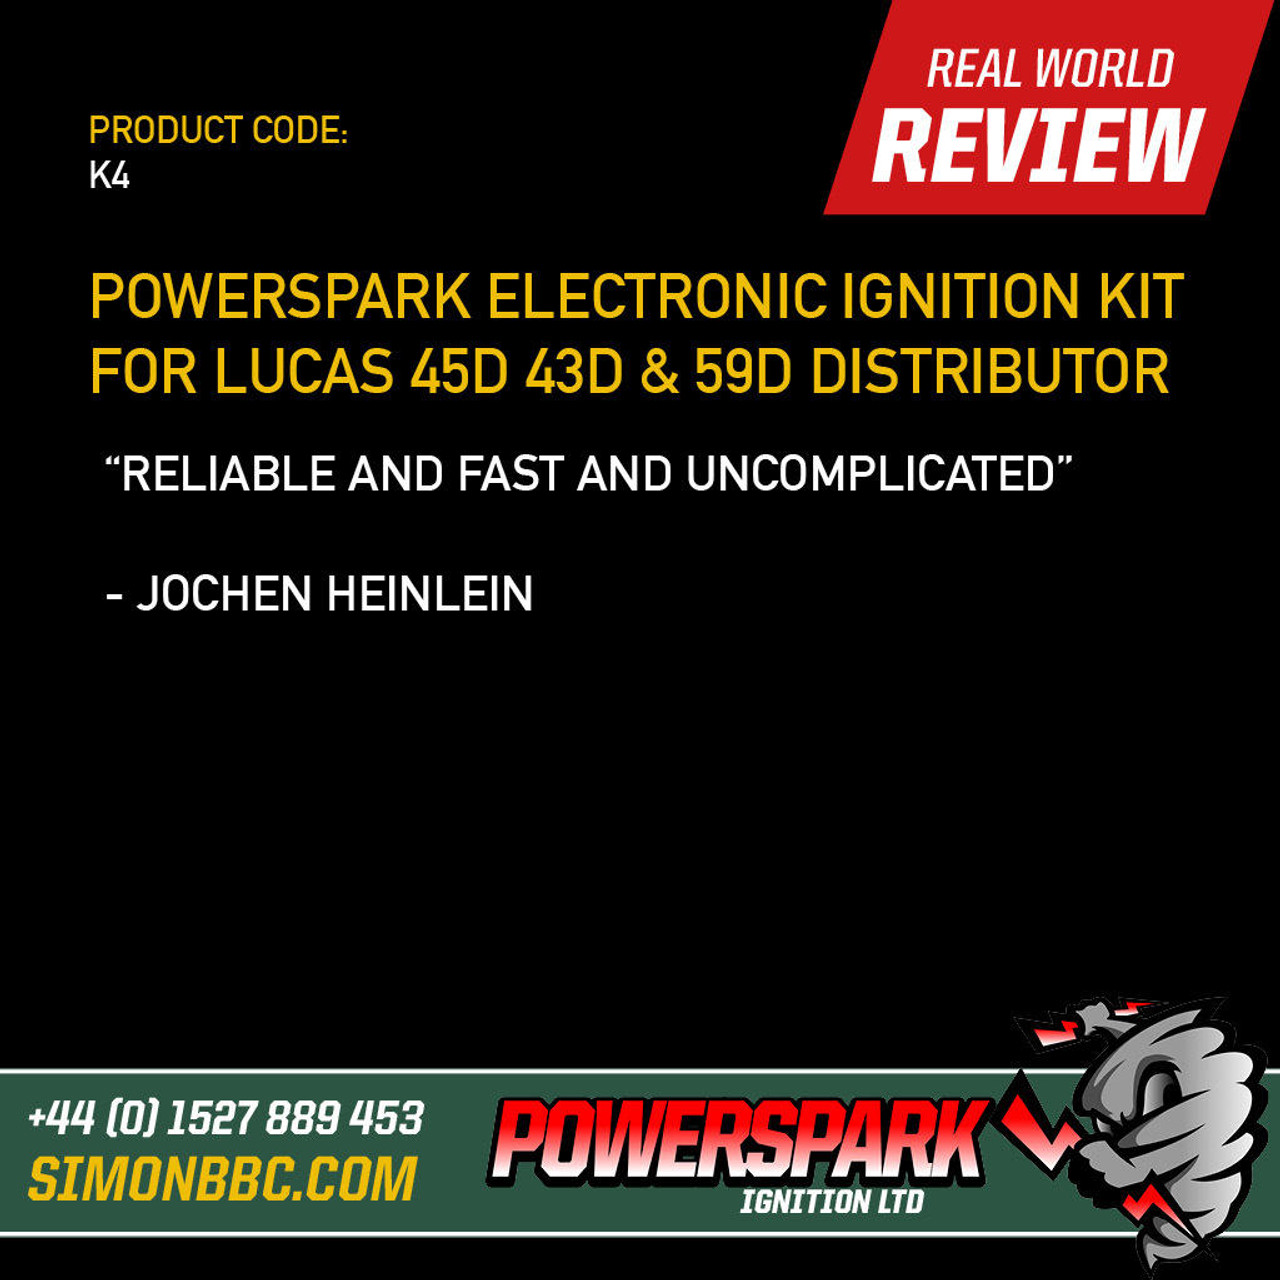 Powerspark Electronic Ignition Kit for Lucas 45D, 43D, 59D Distributor K4 and R2